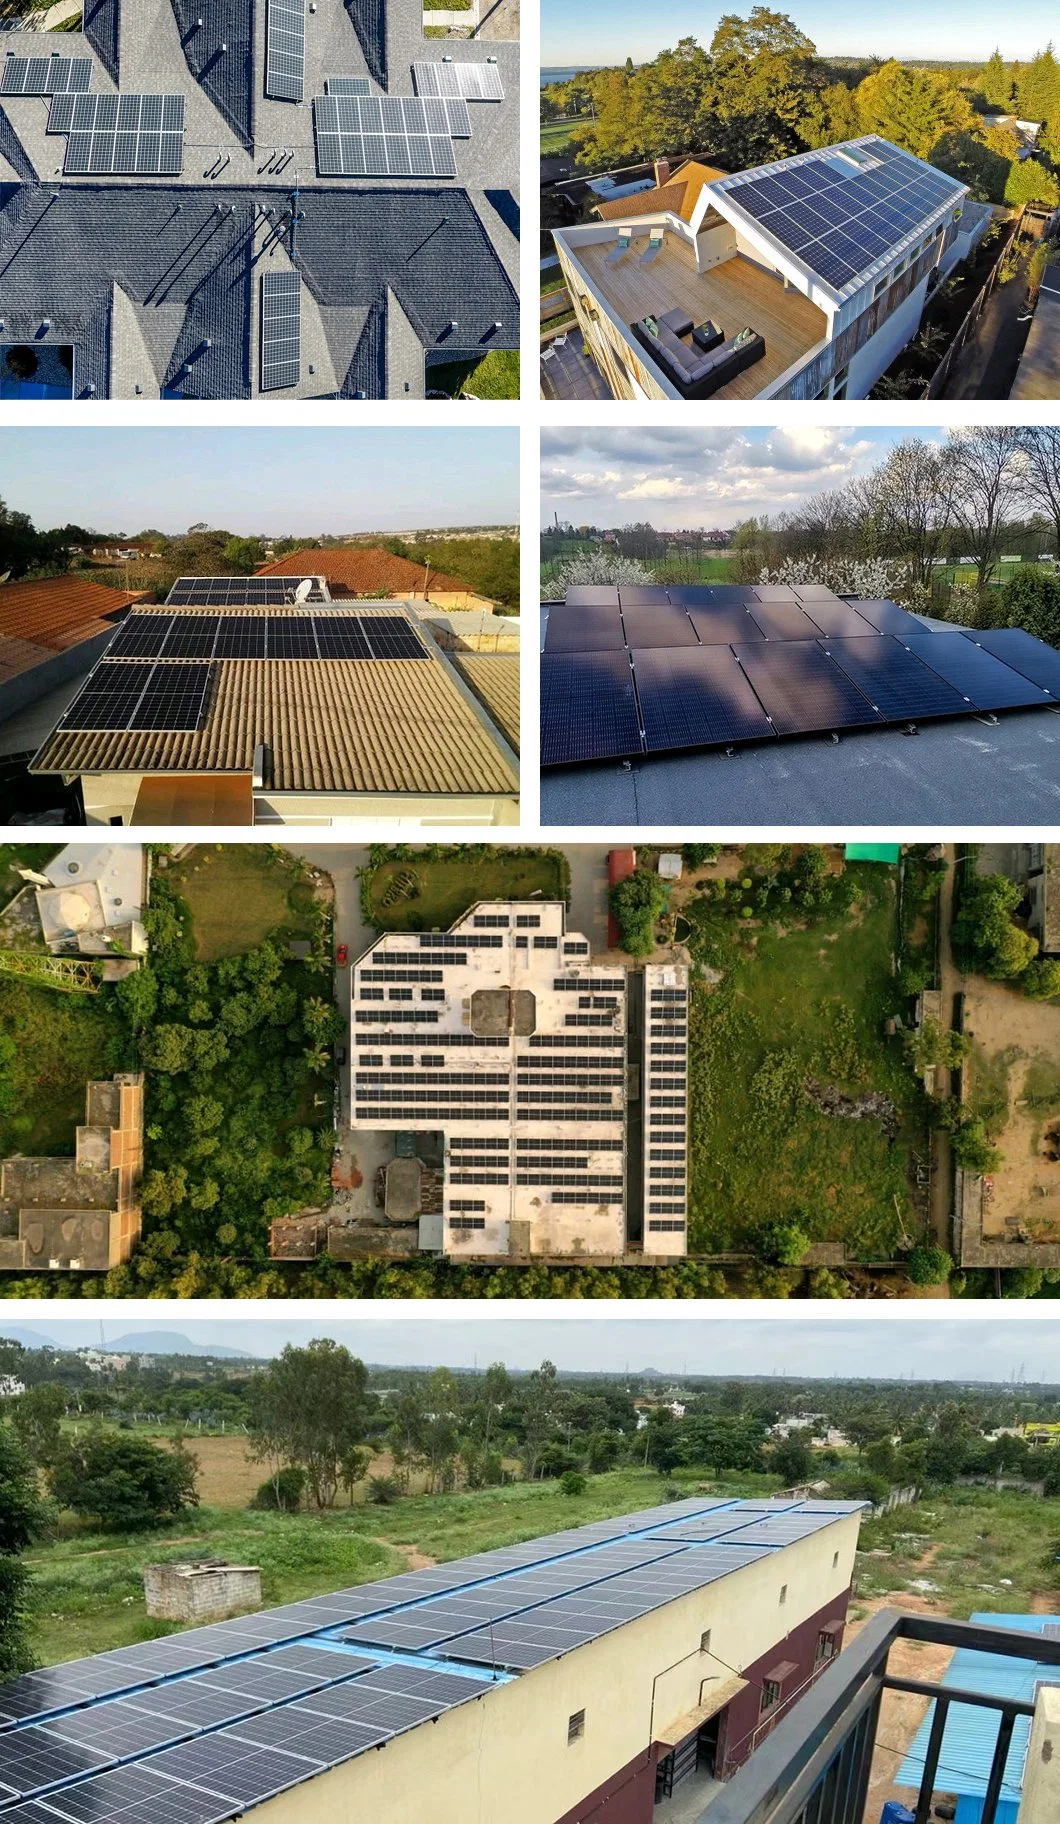 6kw 7kw 8kw 9kw 10kw Complete Solar Kits with High Quallity Solar Panels on Grid Solar Energy System